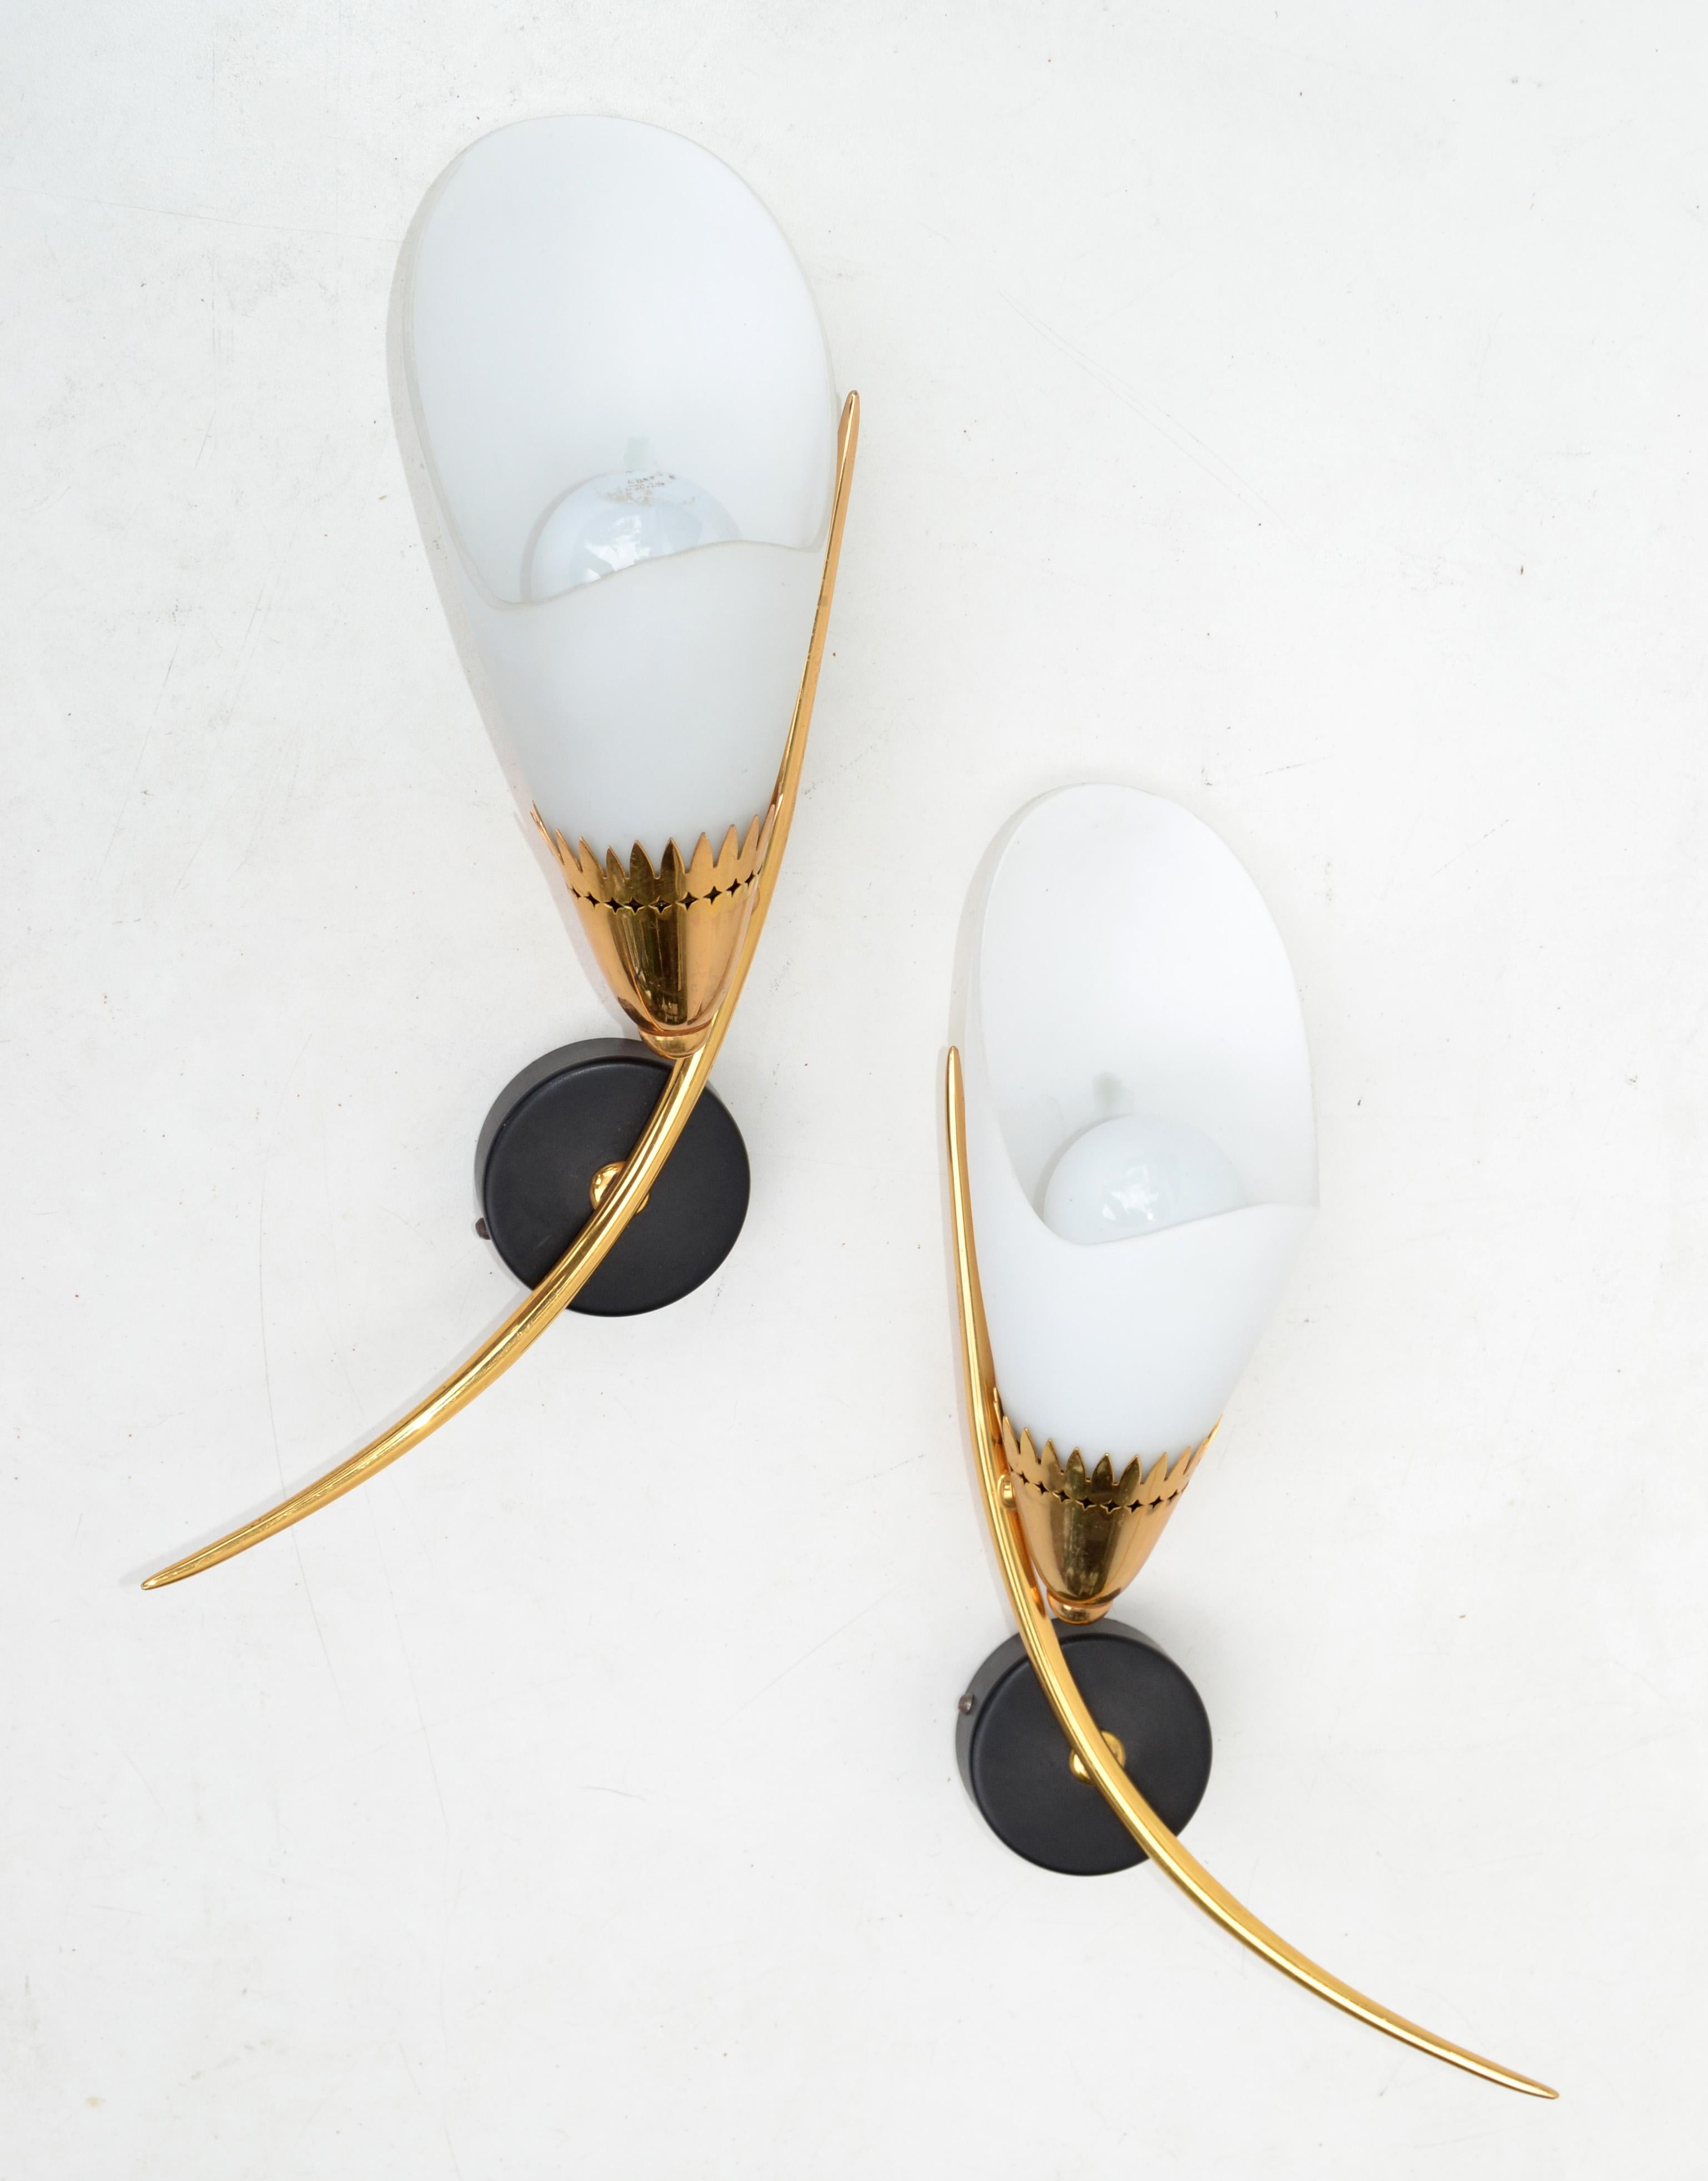 Pair of Maison Lunel sconce, wall light with original cone Opaline shades, made out of brass and steel.
Both are the same size and mirror image of each other, superb French Design from the 1960s.
Each Sconces takes 1 light bulbs with max. 40